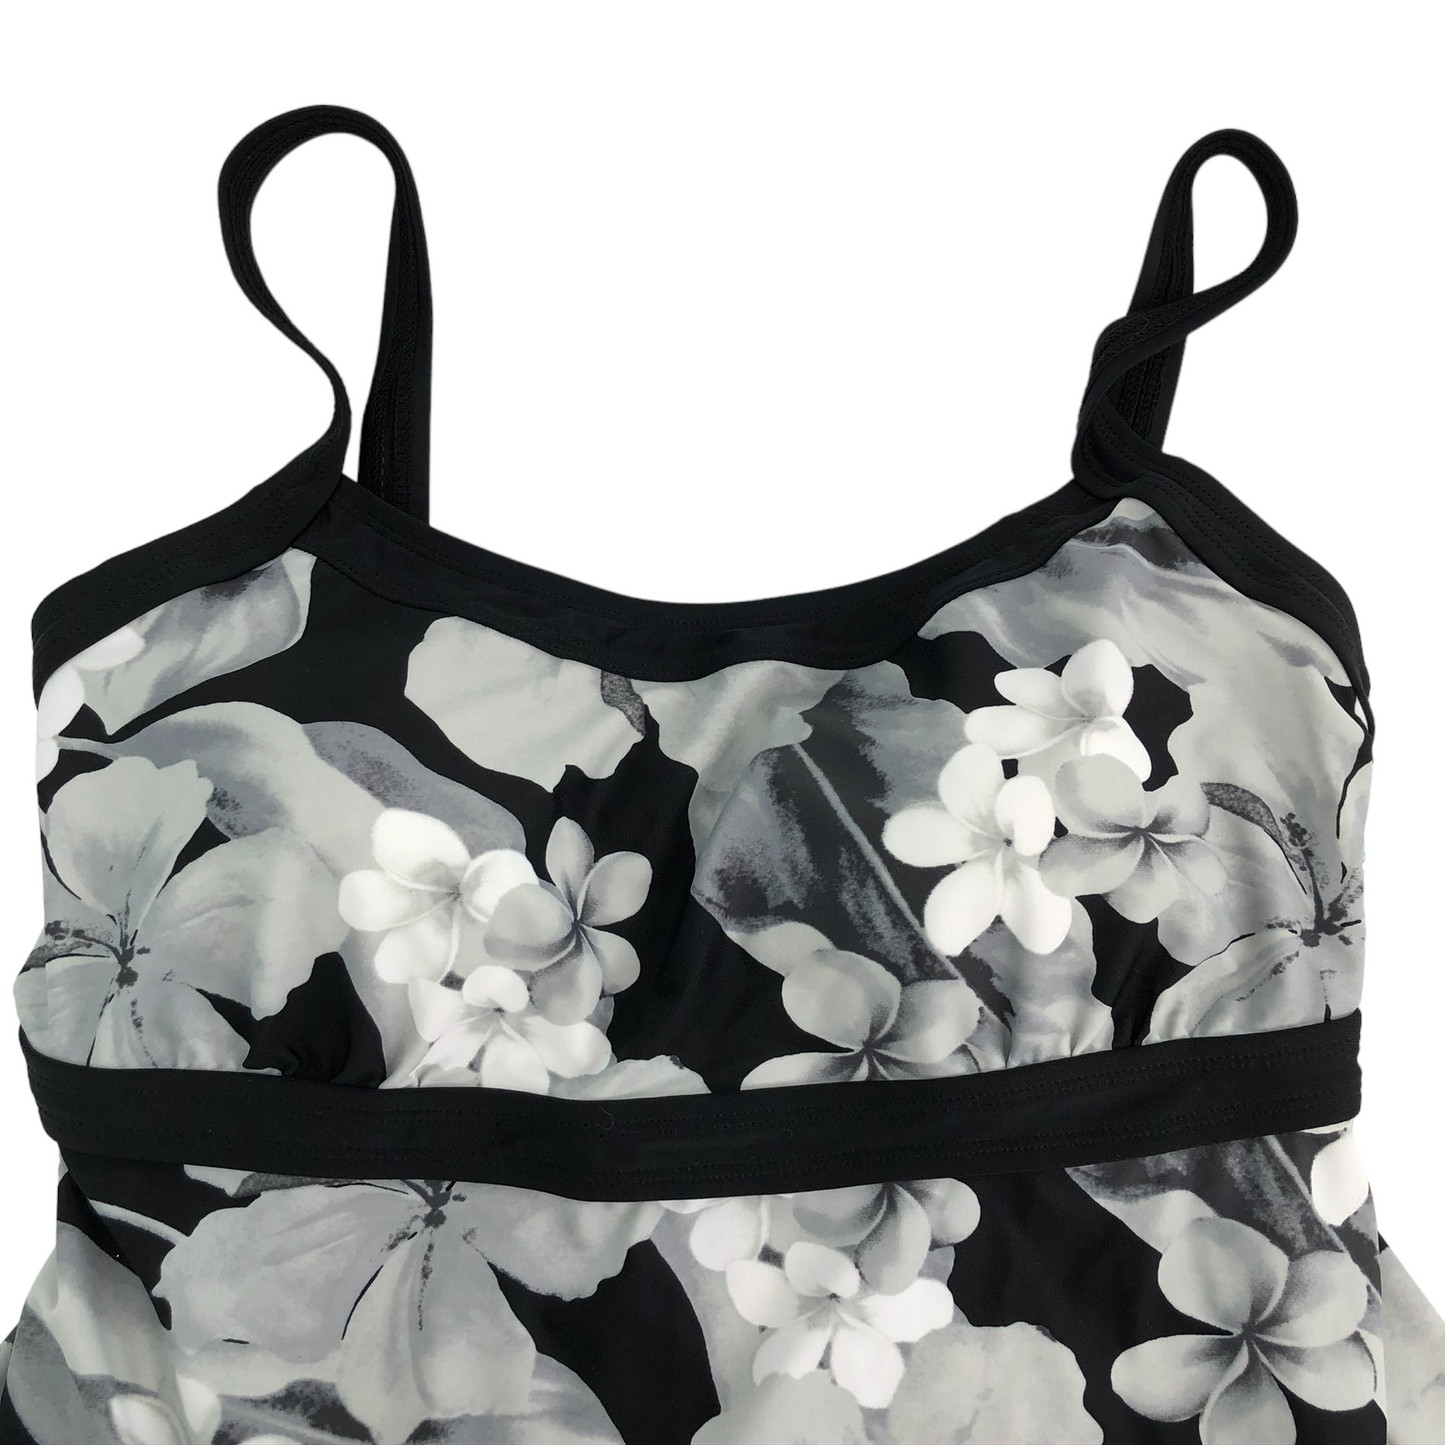 Beach Belle Casablanca swimwear top size 14 Black and Gray Floral NWT